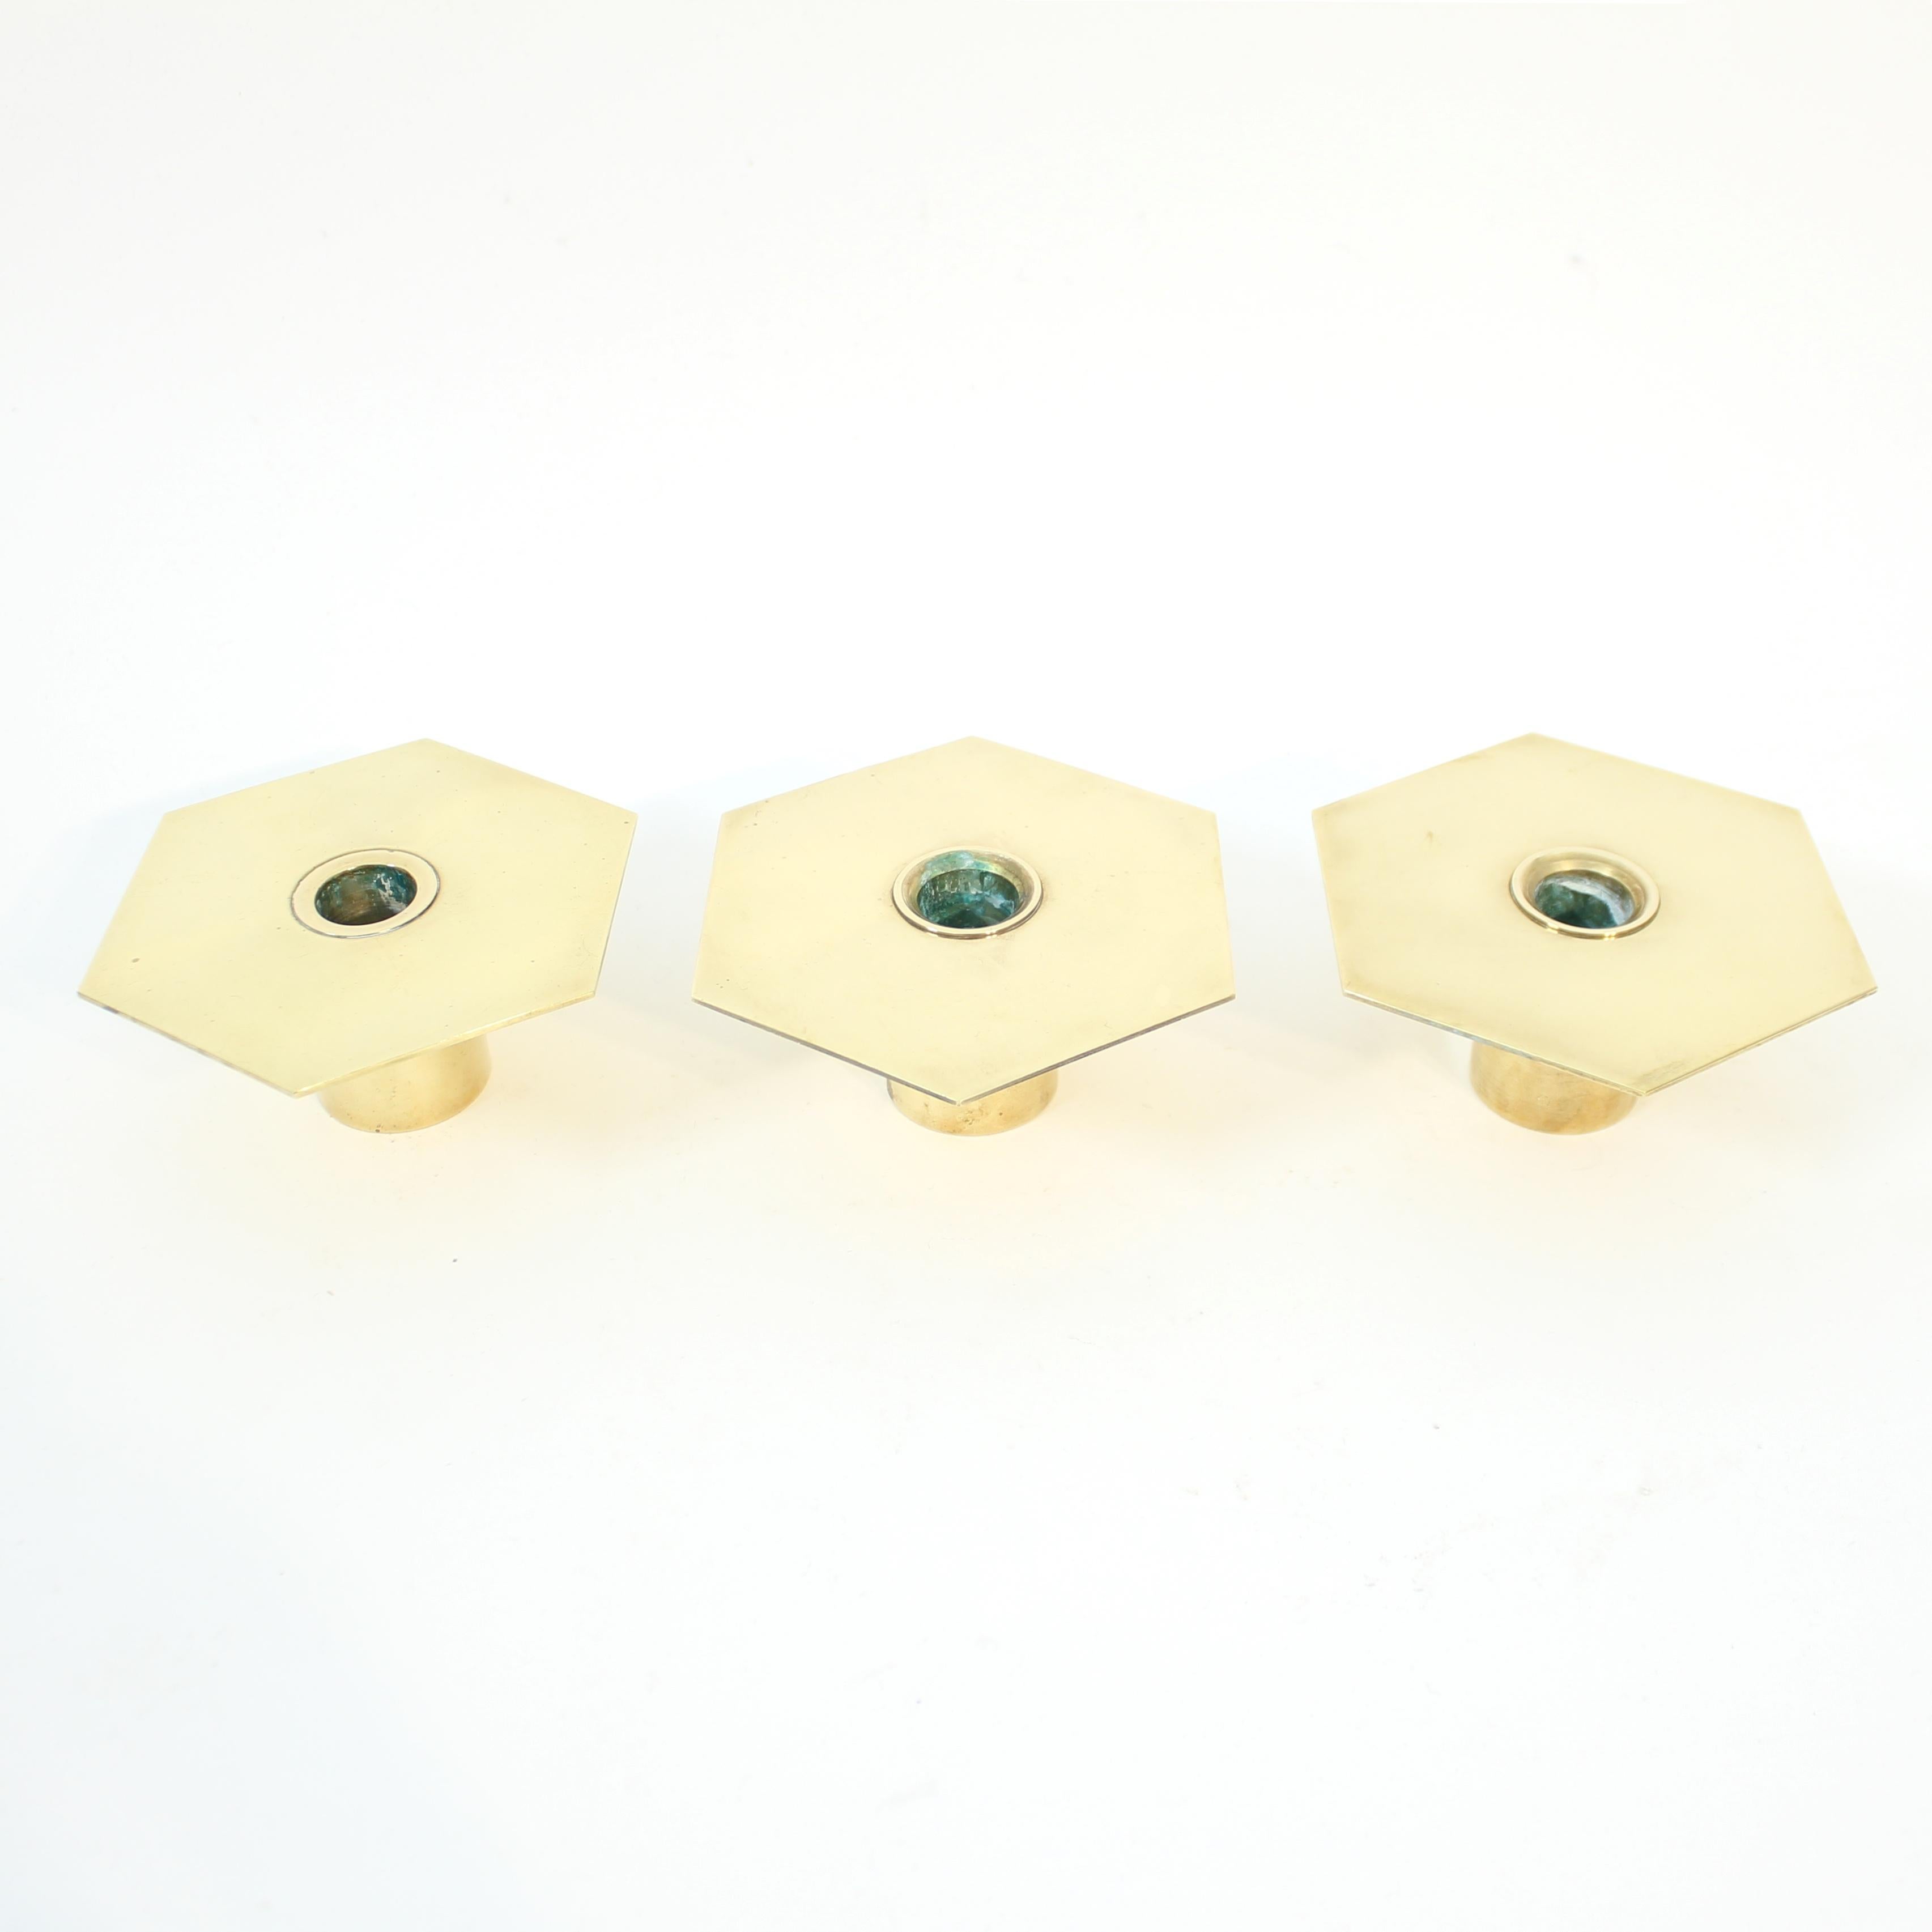 Scandinavian Modern Sigurd Persson, set of 3 brass Romb candle holders, 1980s For Sale